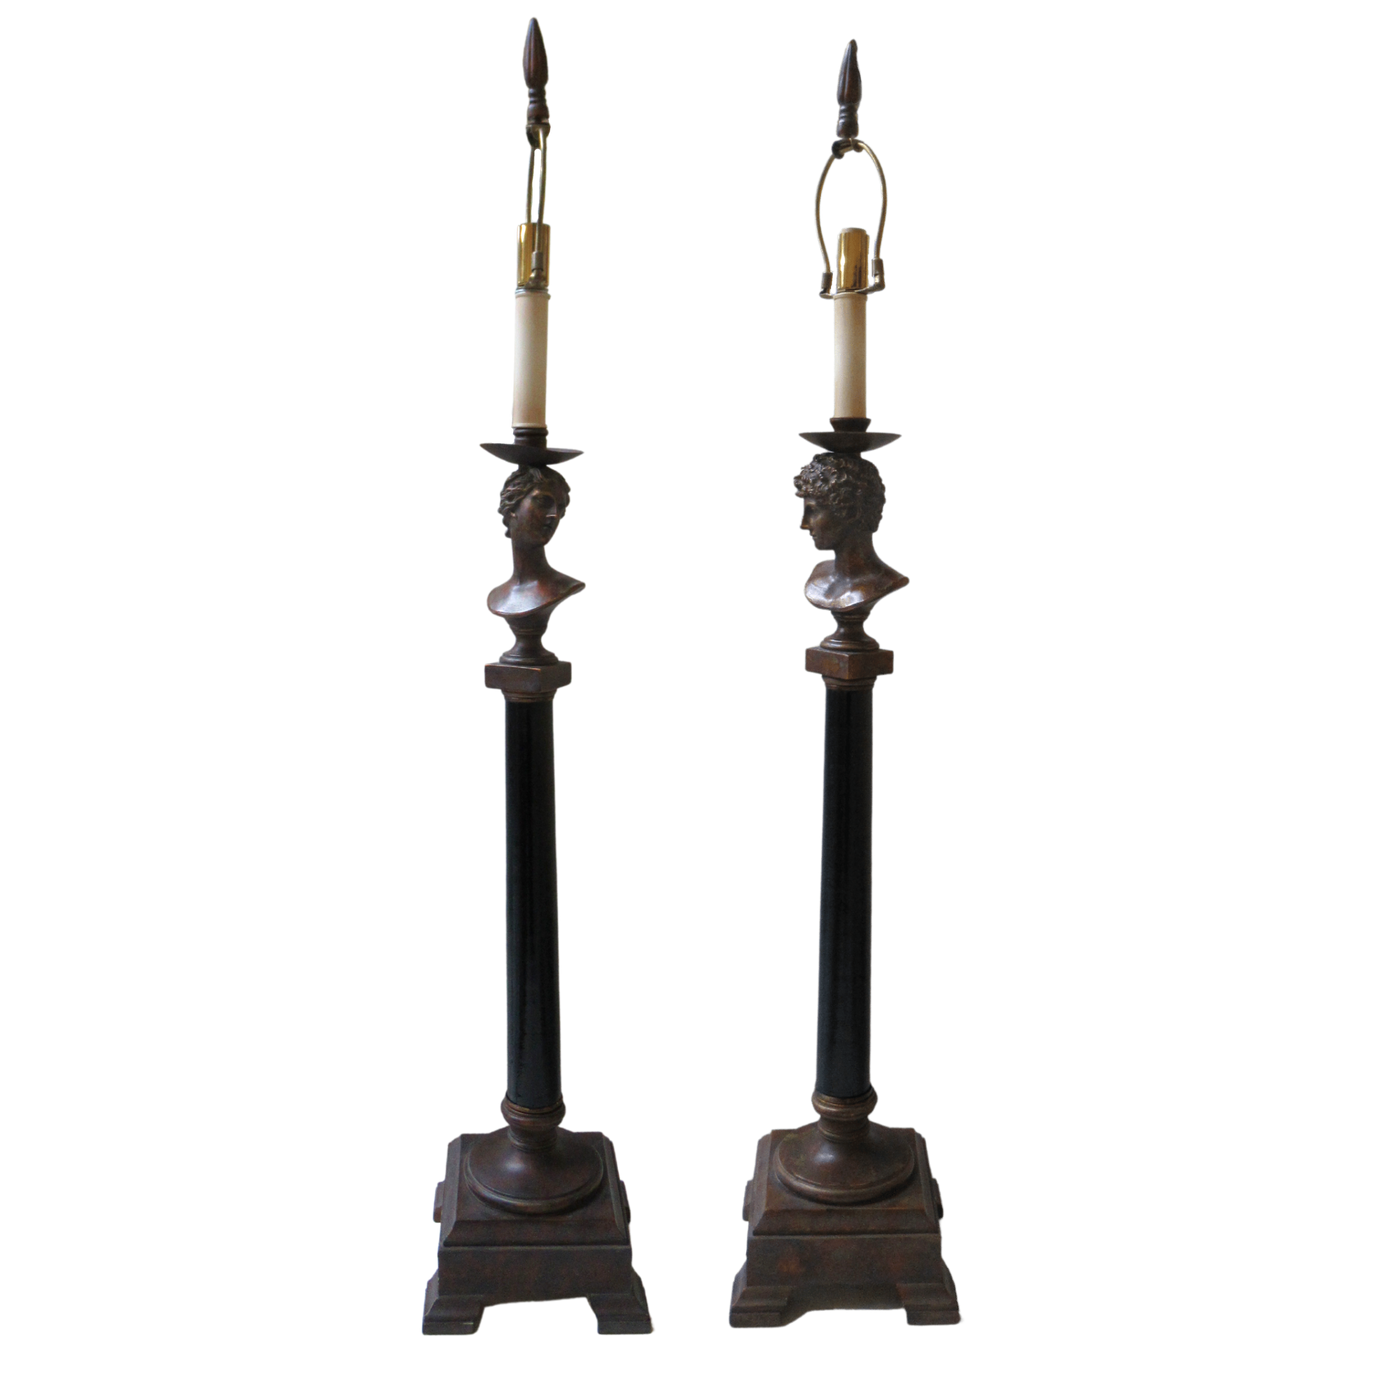 Pair of Heavy French Neoclassical Style Bust Buffet Lamps